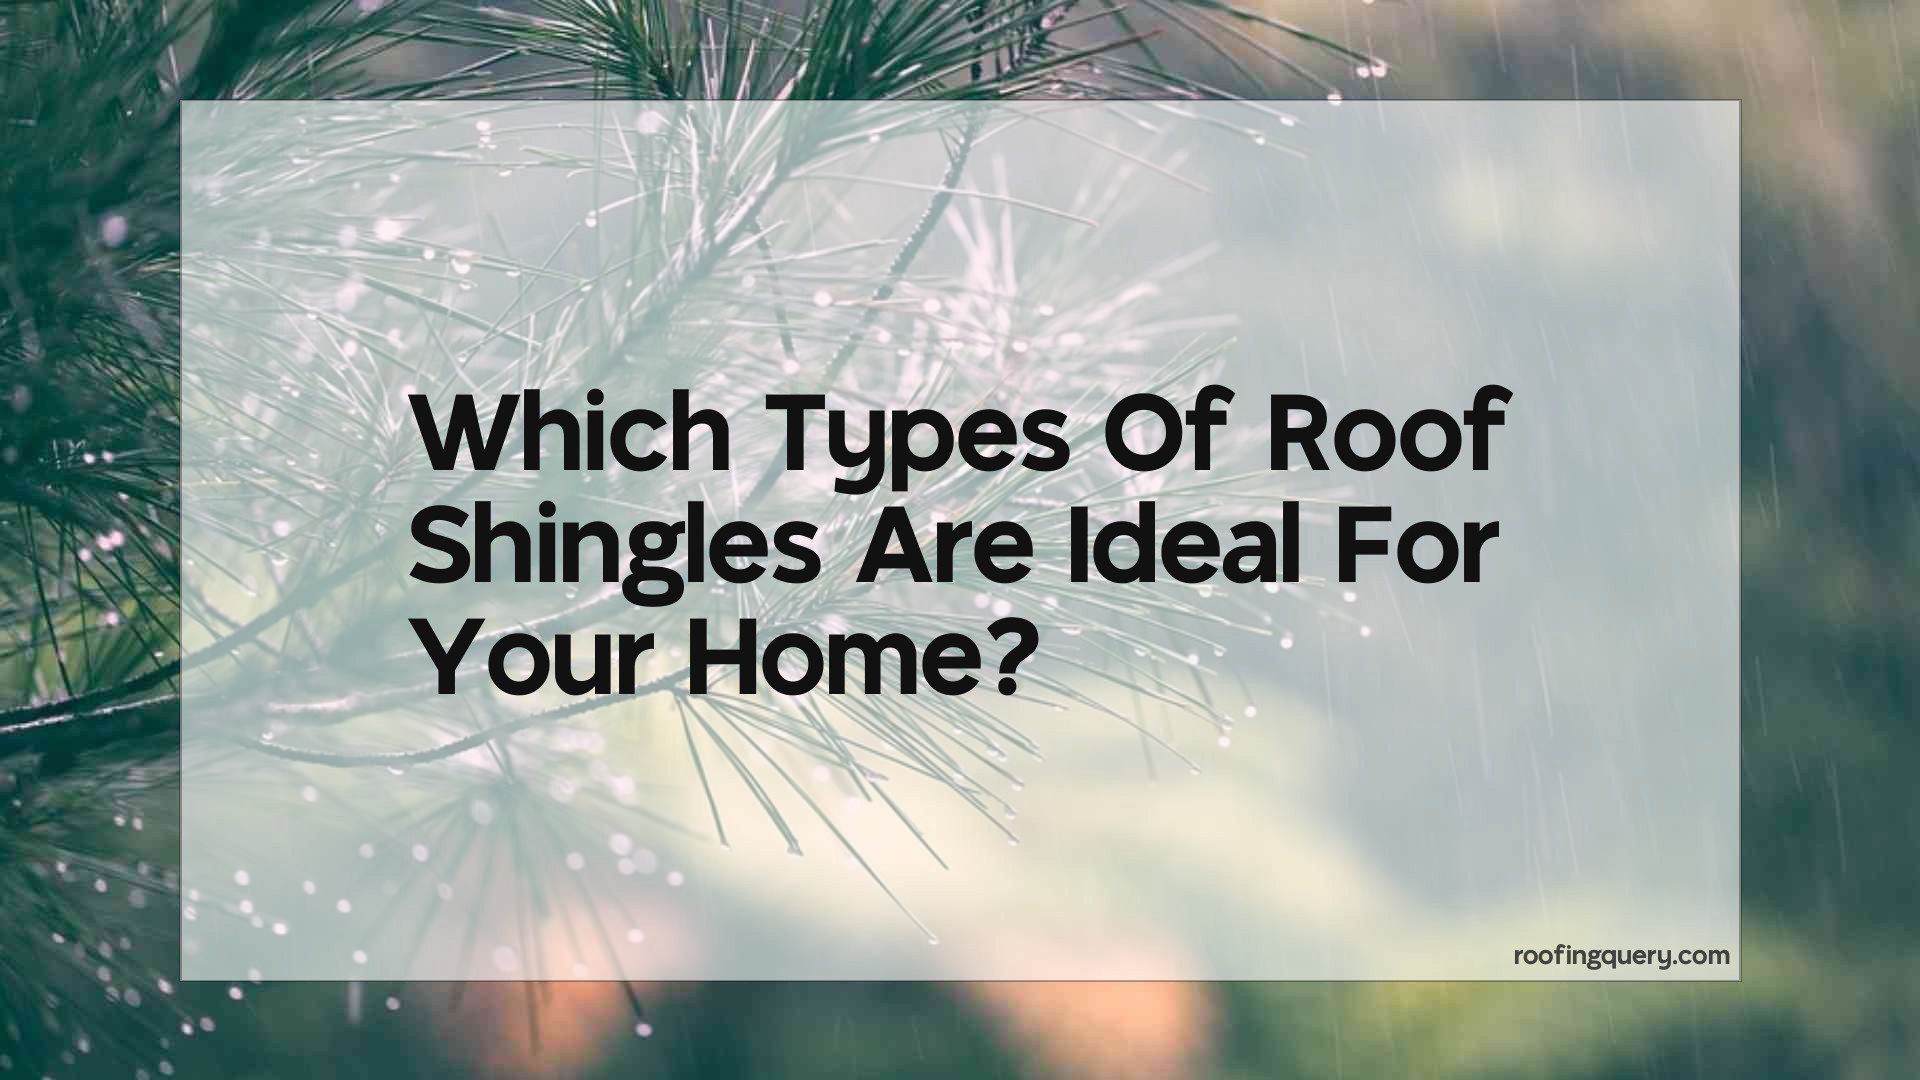 Which Types Of Roof Shingles Are Ideal For Your Home?